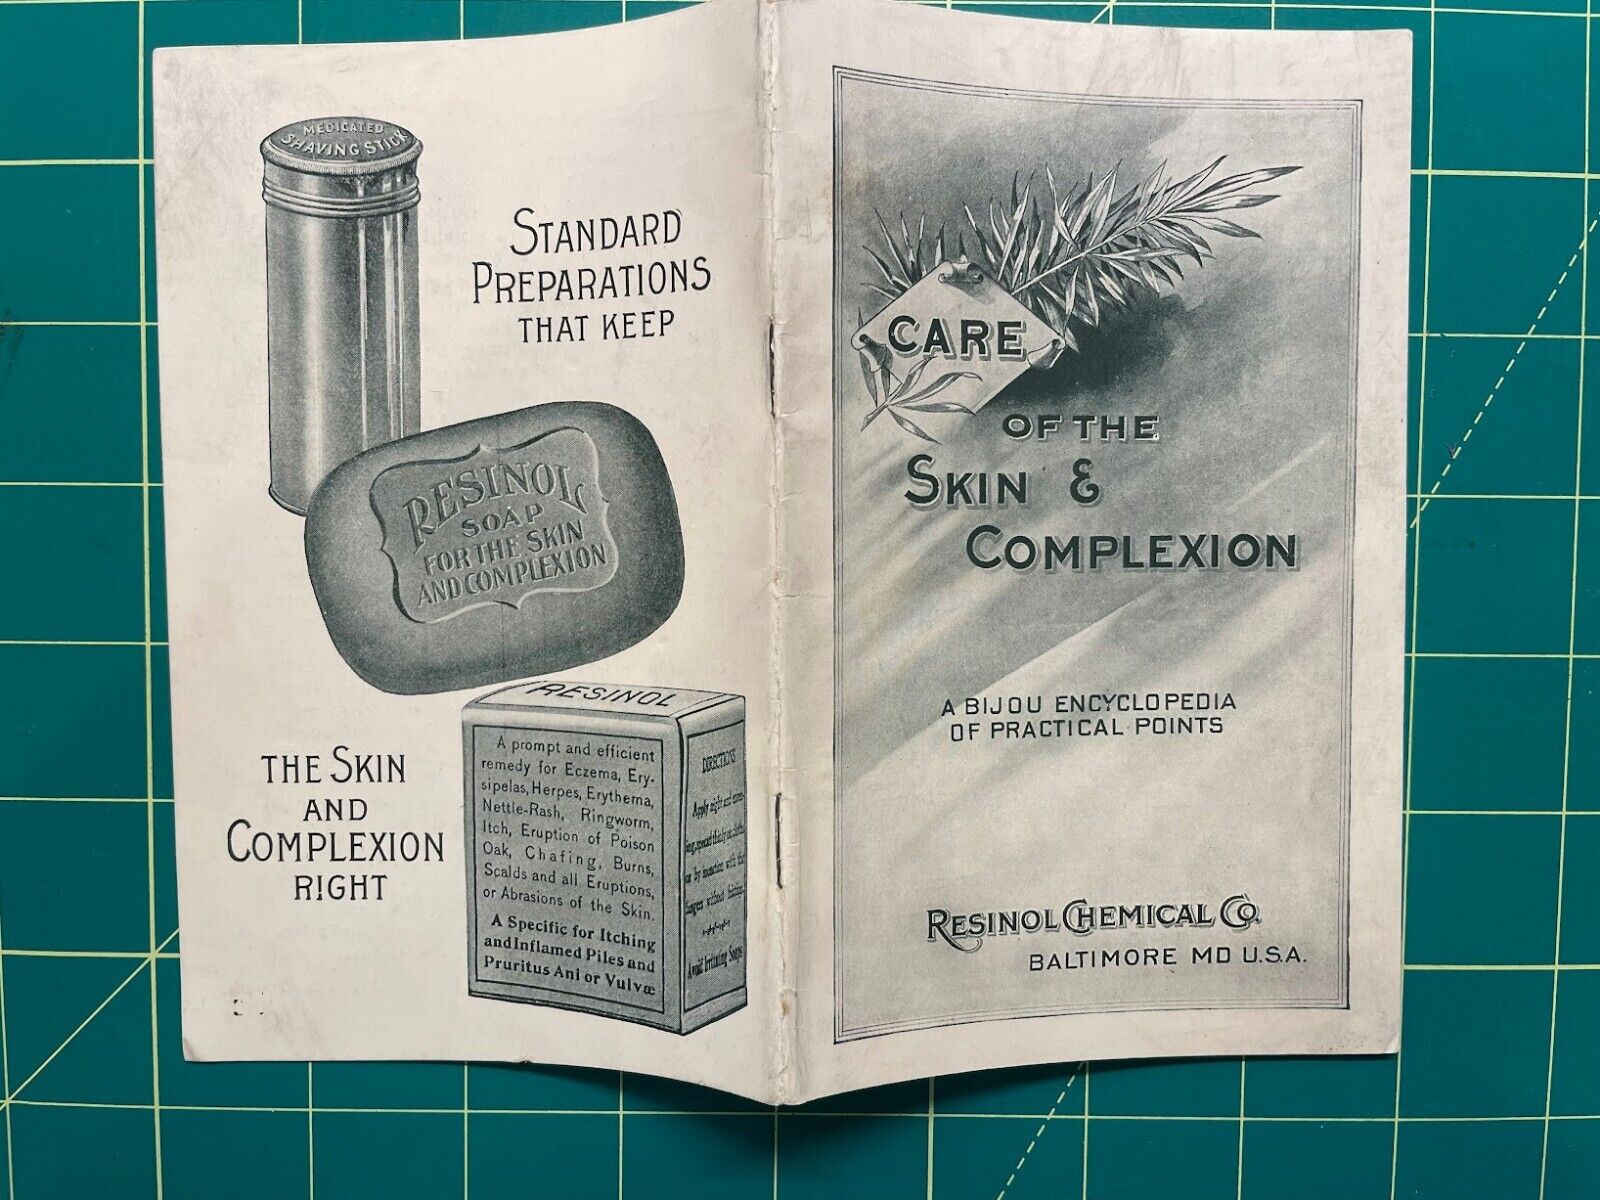 Resinol booklet 1909 - Care of the Skin & Complexion